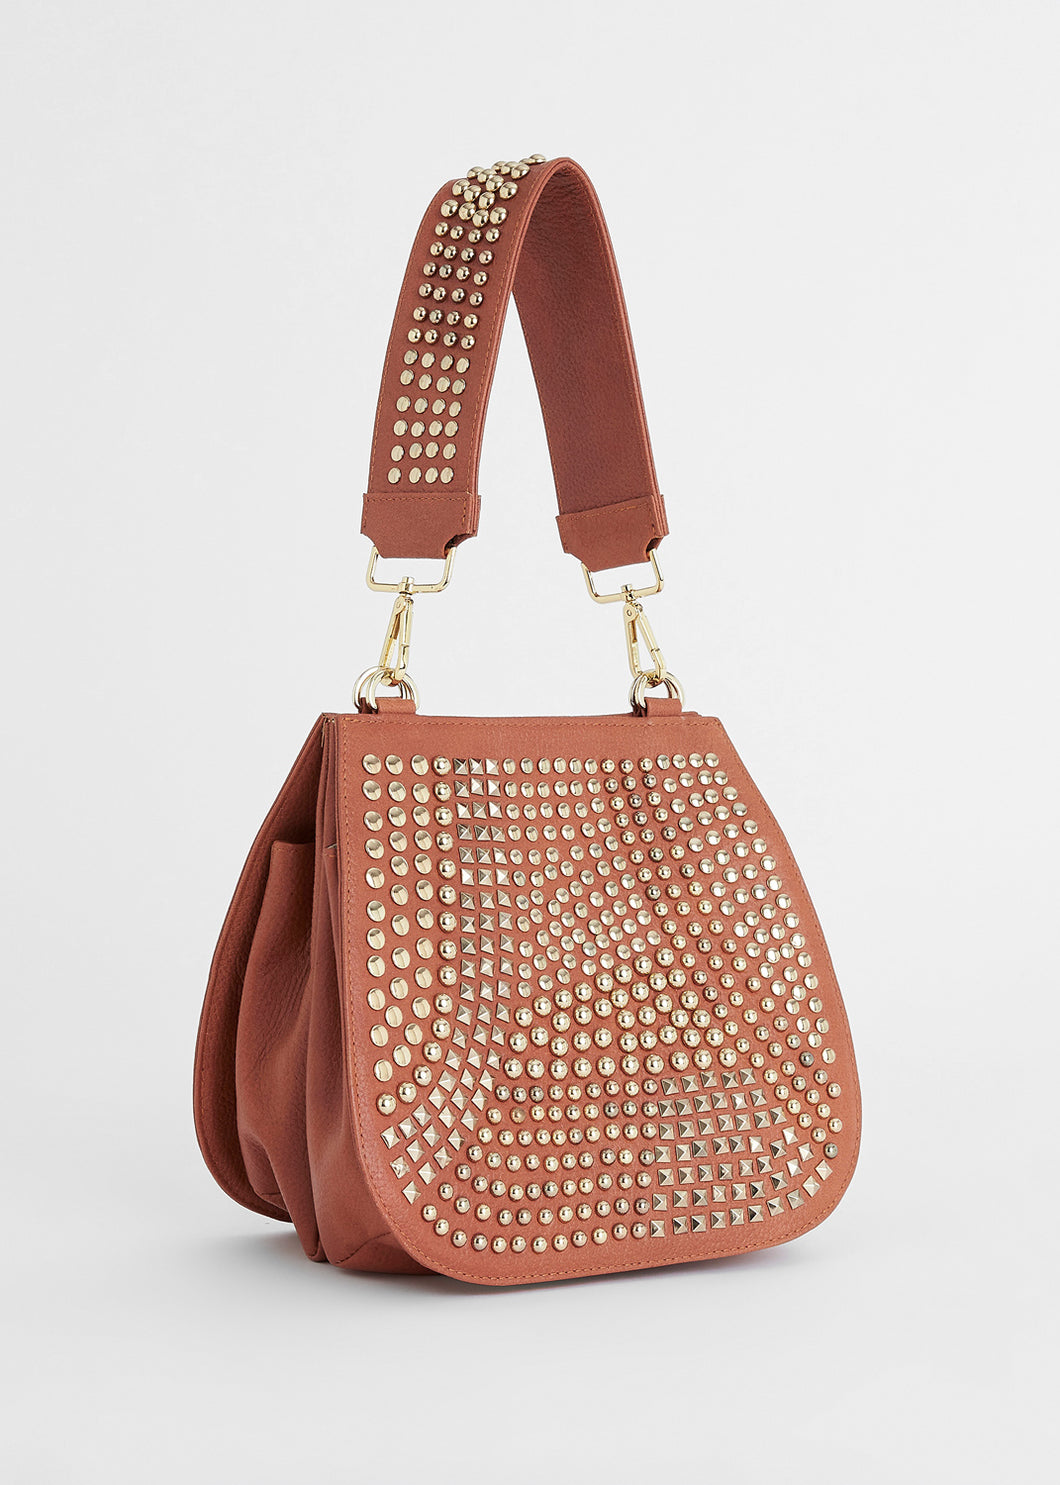 Double_Sided_Saddle_Bag_in_Tan_and_Gold